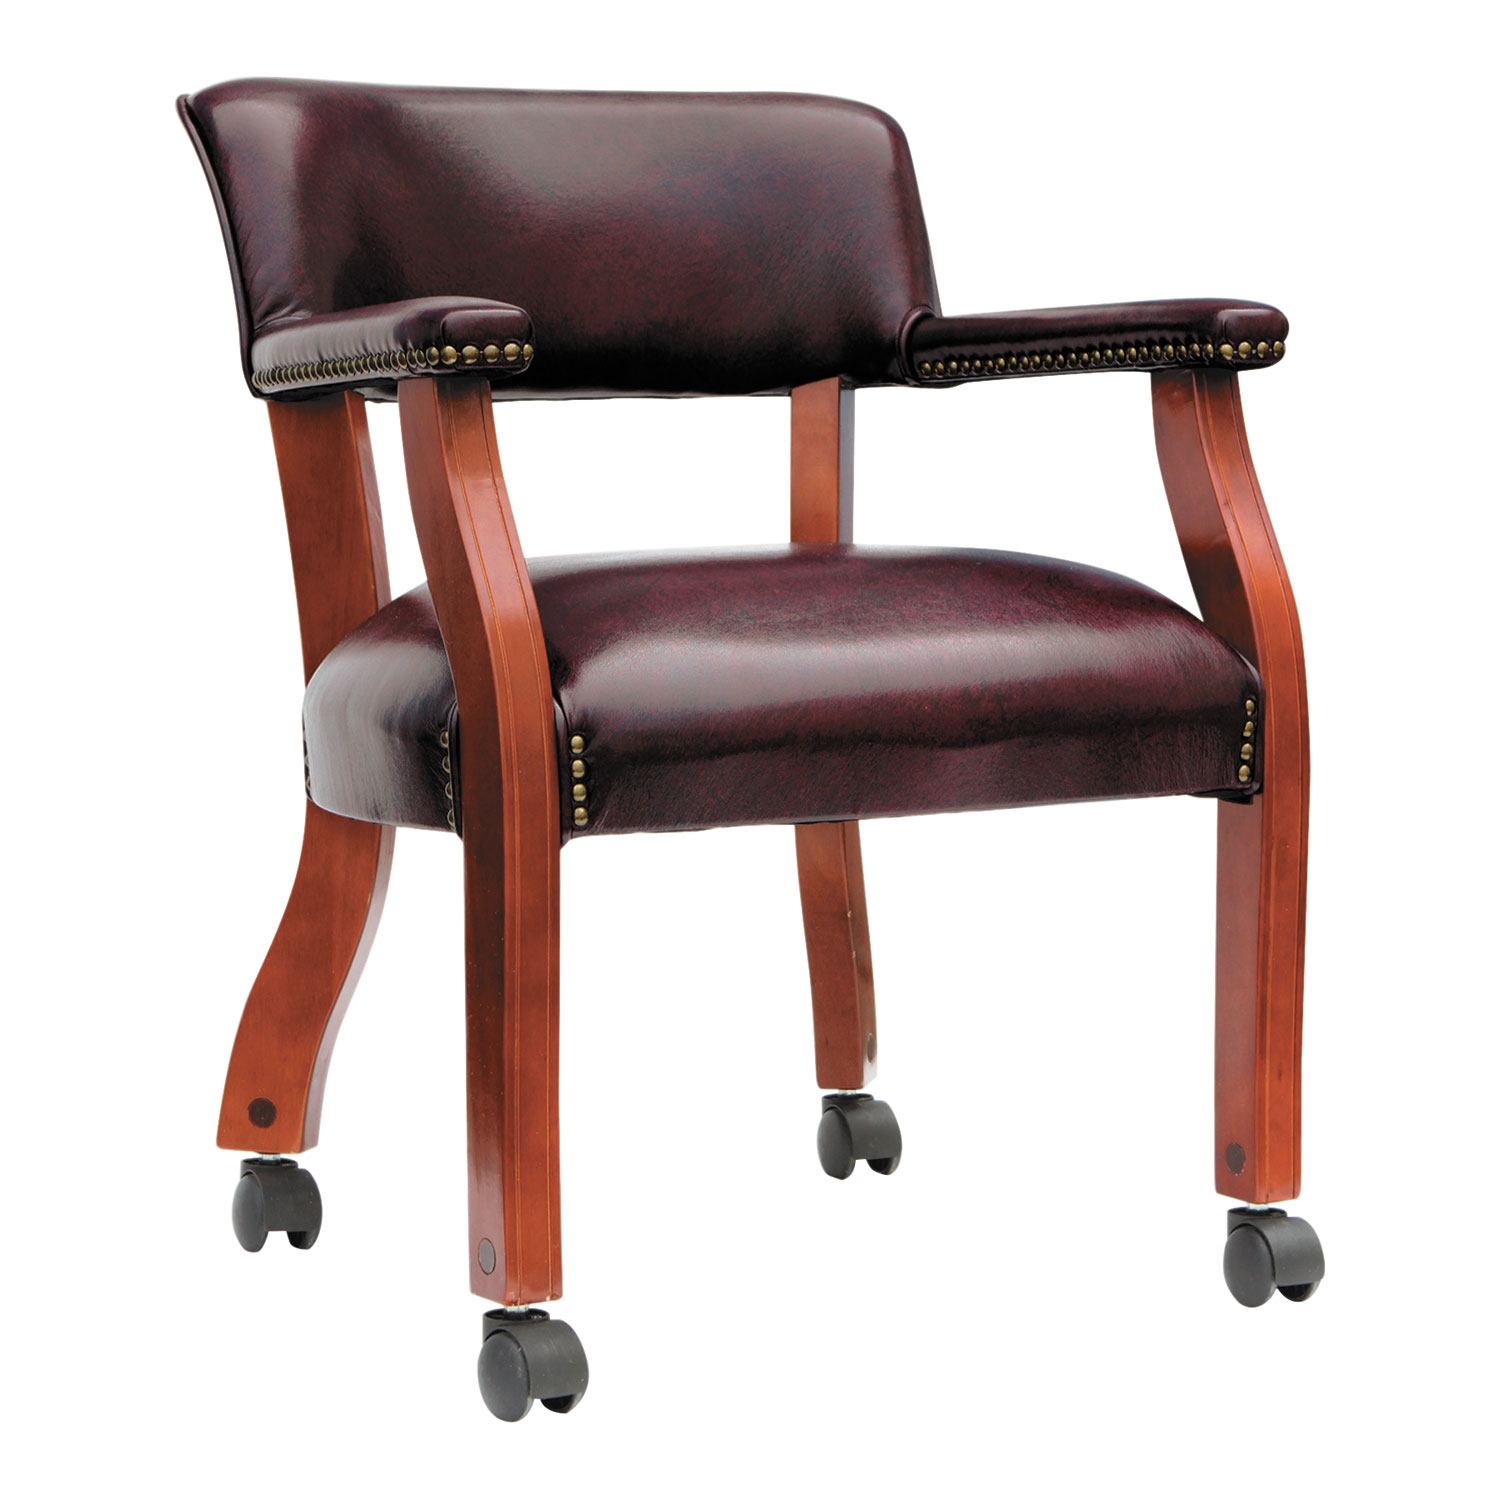  Alera ALETDC4336 Alera Traditional Series Guest Arm Chair with Casters, 23.22'' x 24.4'' x 29.52'', Oxblood Burgundy Seat/Back, Mahogany Base (ALETDC4336) 